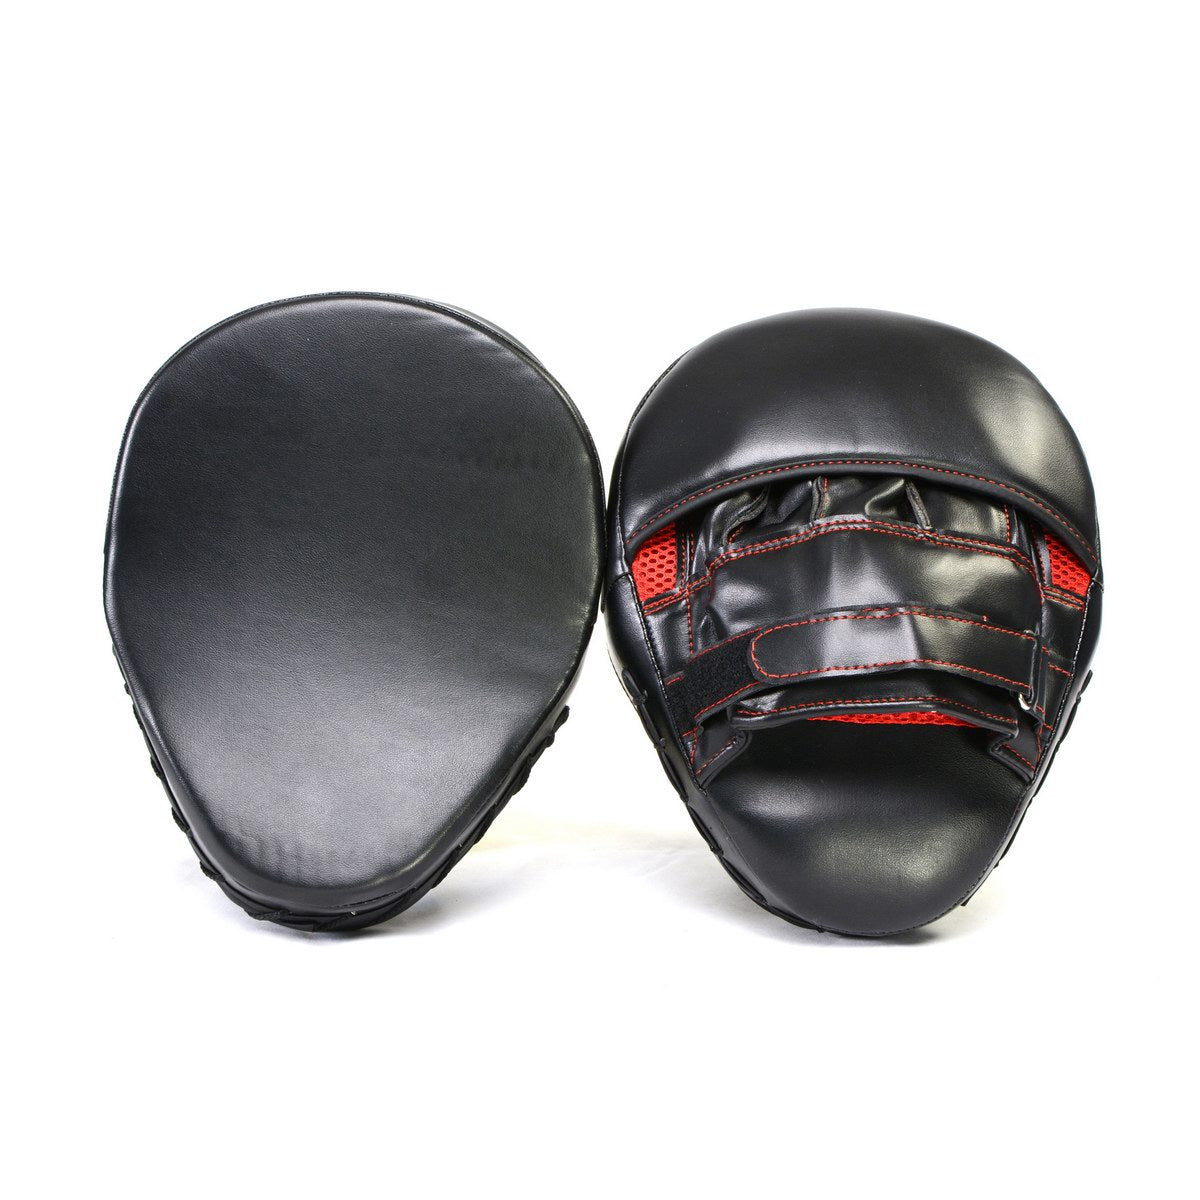 X Fitness XF8000 Curved Boxing MMA Punching Mitts-BLK/RED